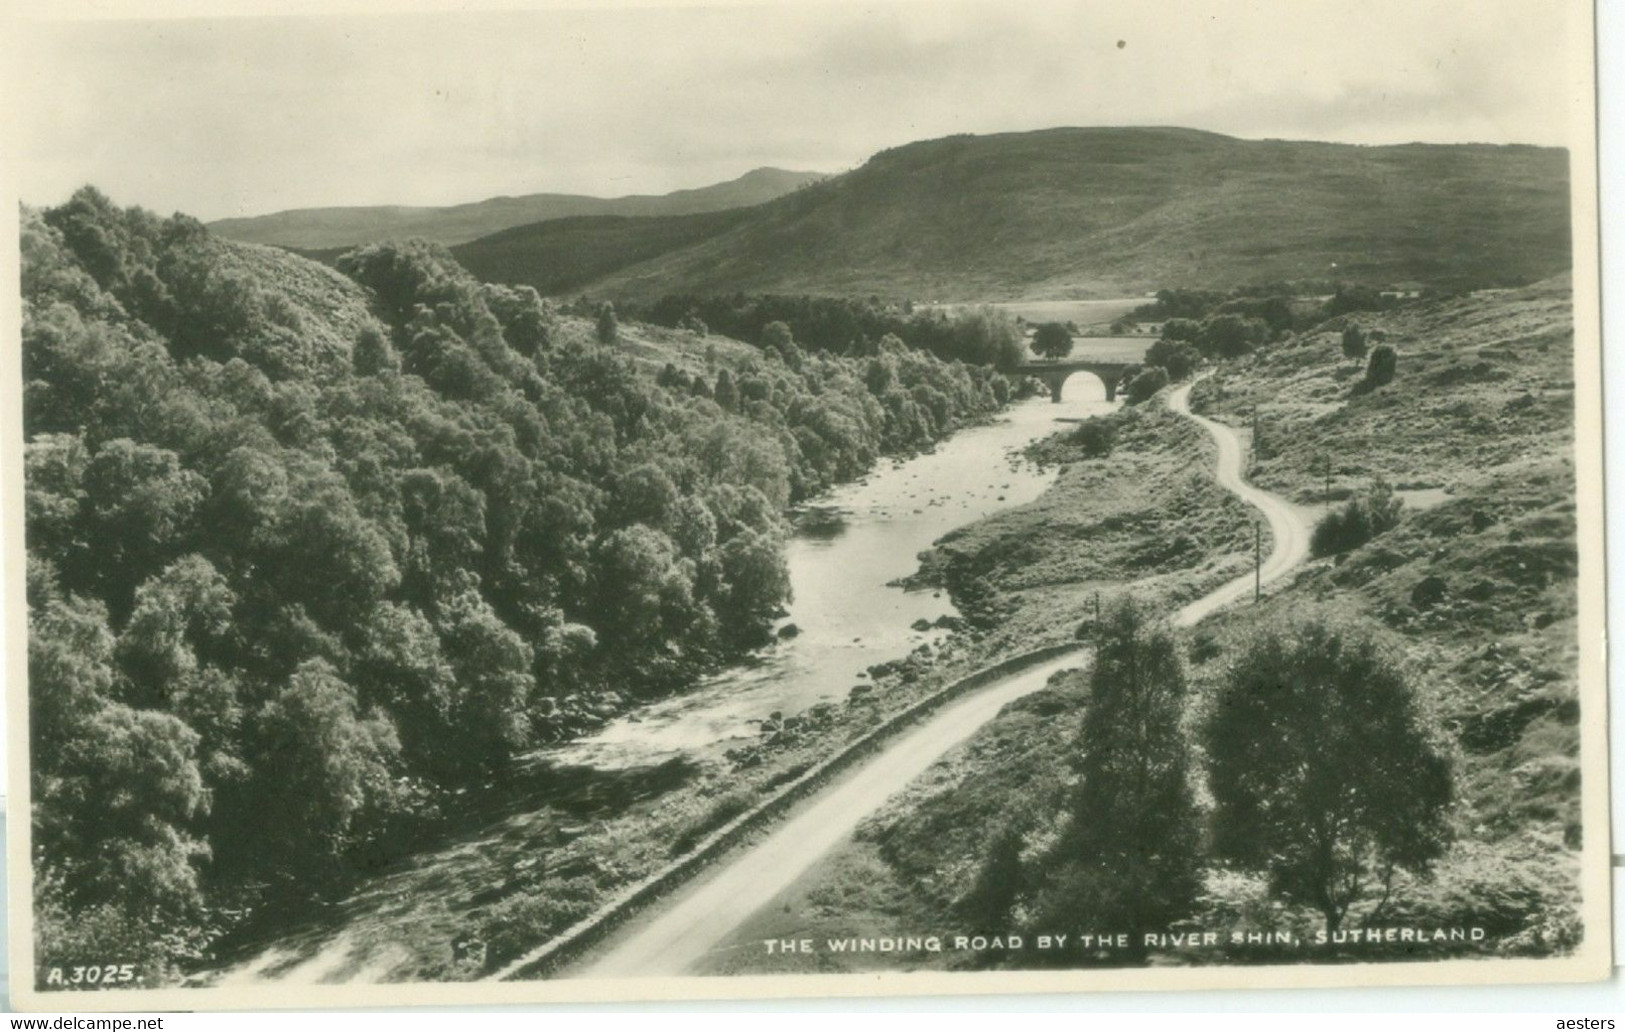 Lairg; The Winding Road By The River Shin - Not Circulated. (J.B. White Ltd. - Dundee) - Sutherland